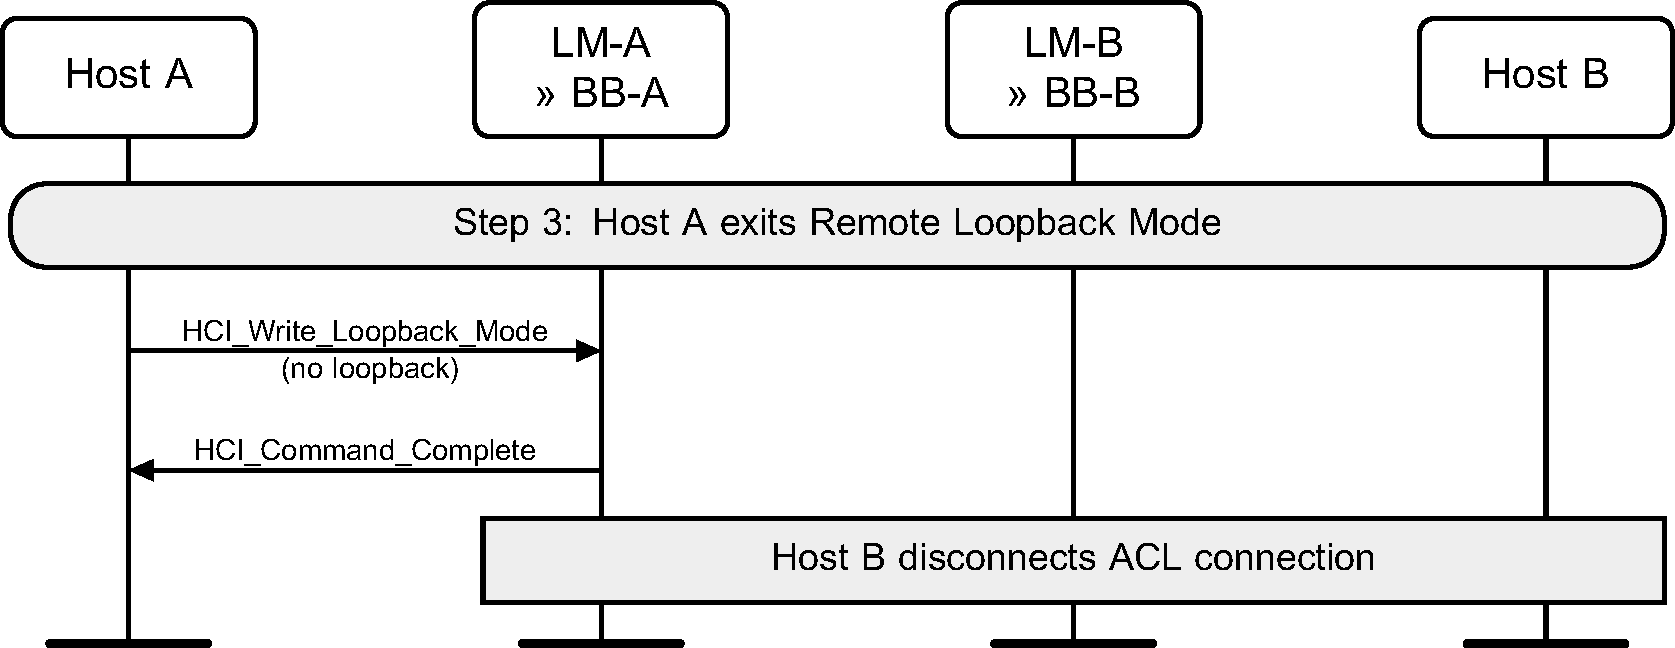 Exiting Remote Loopback mode